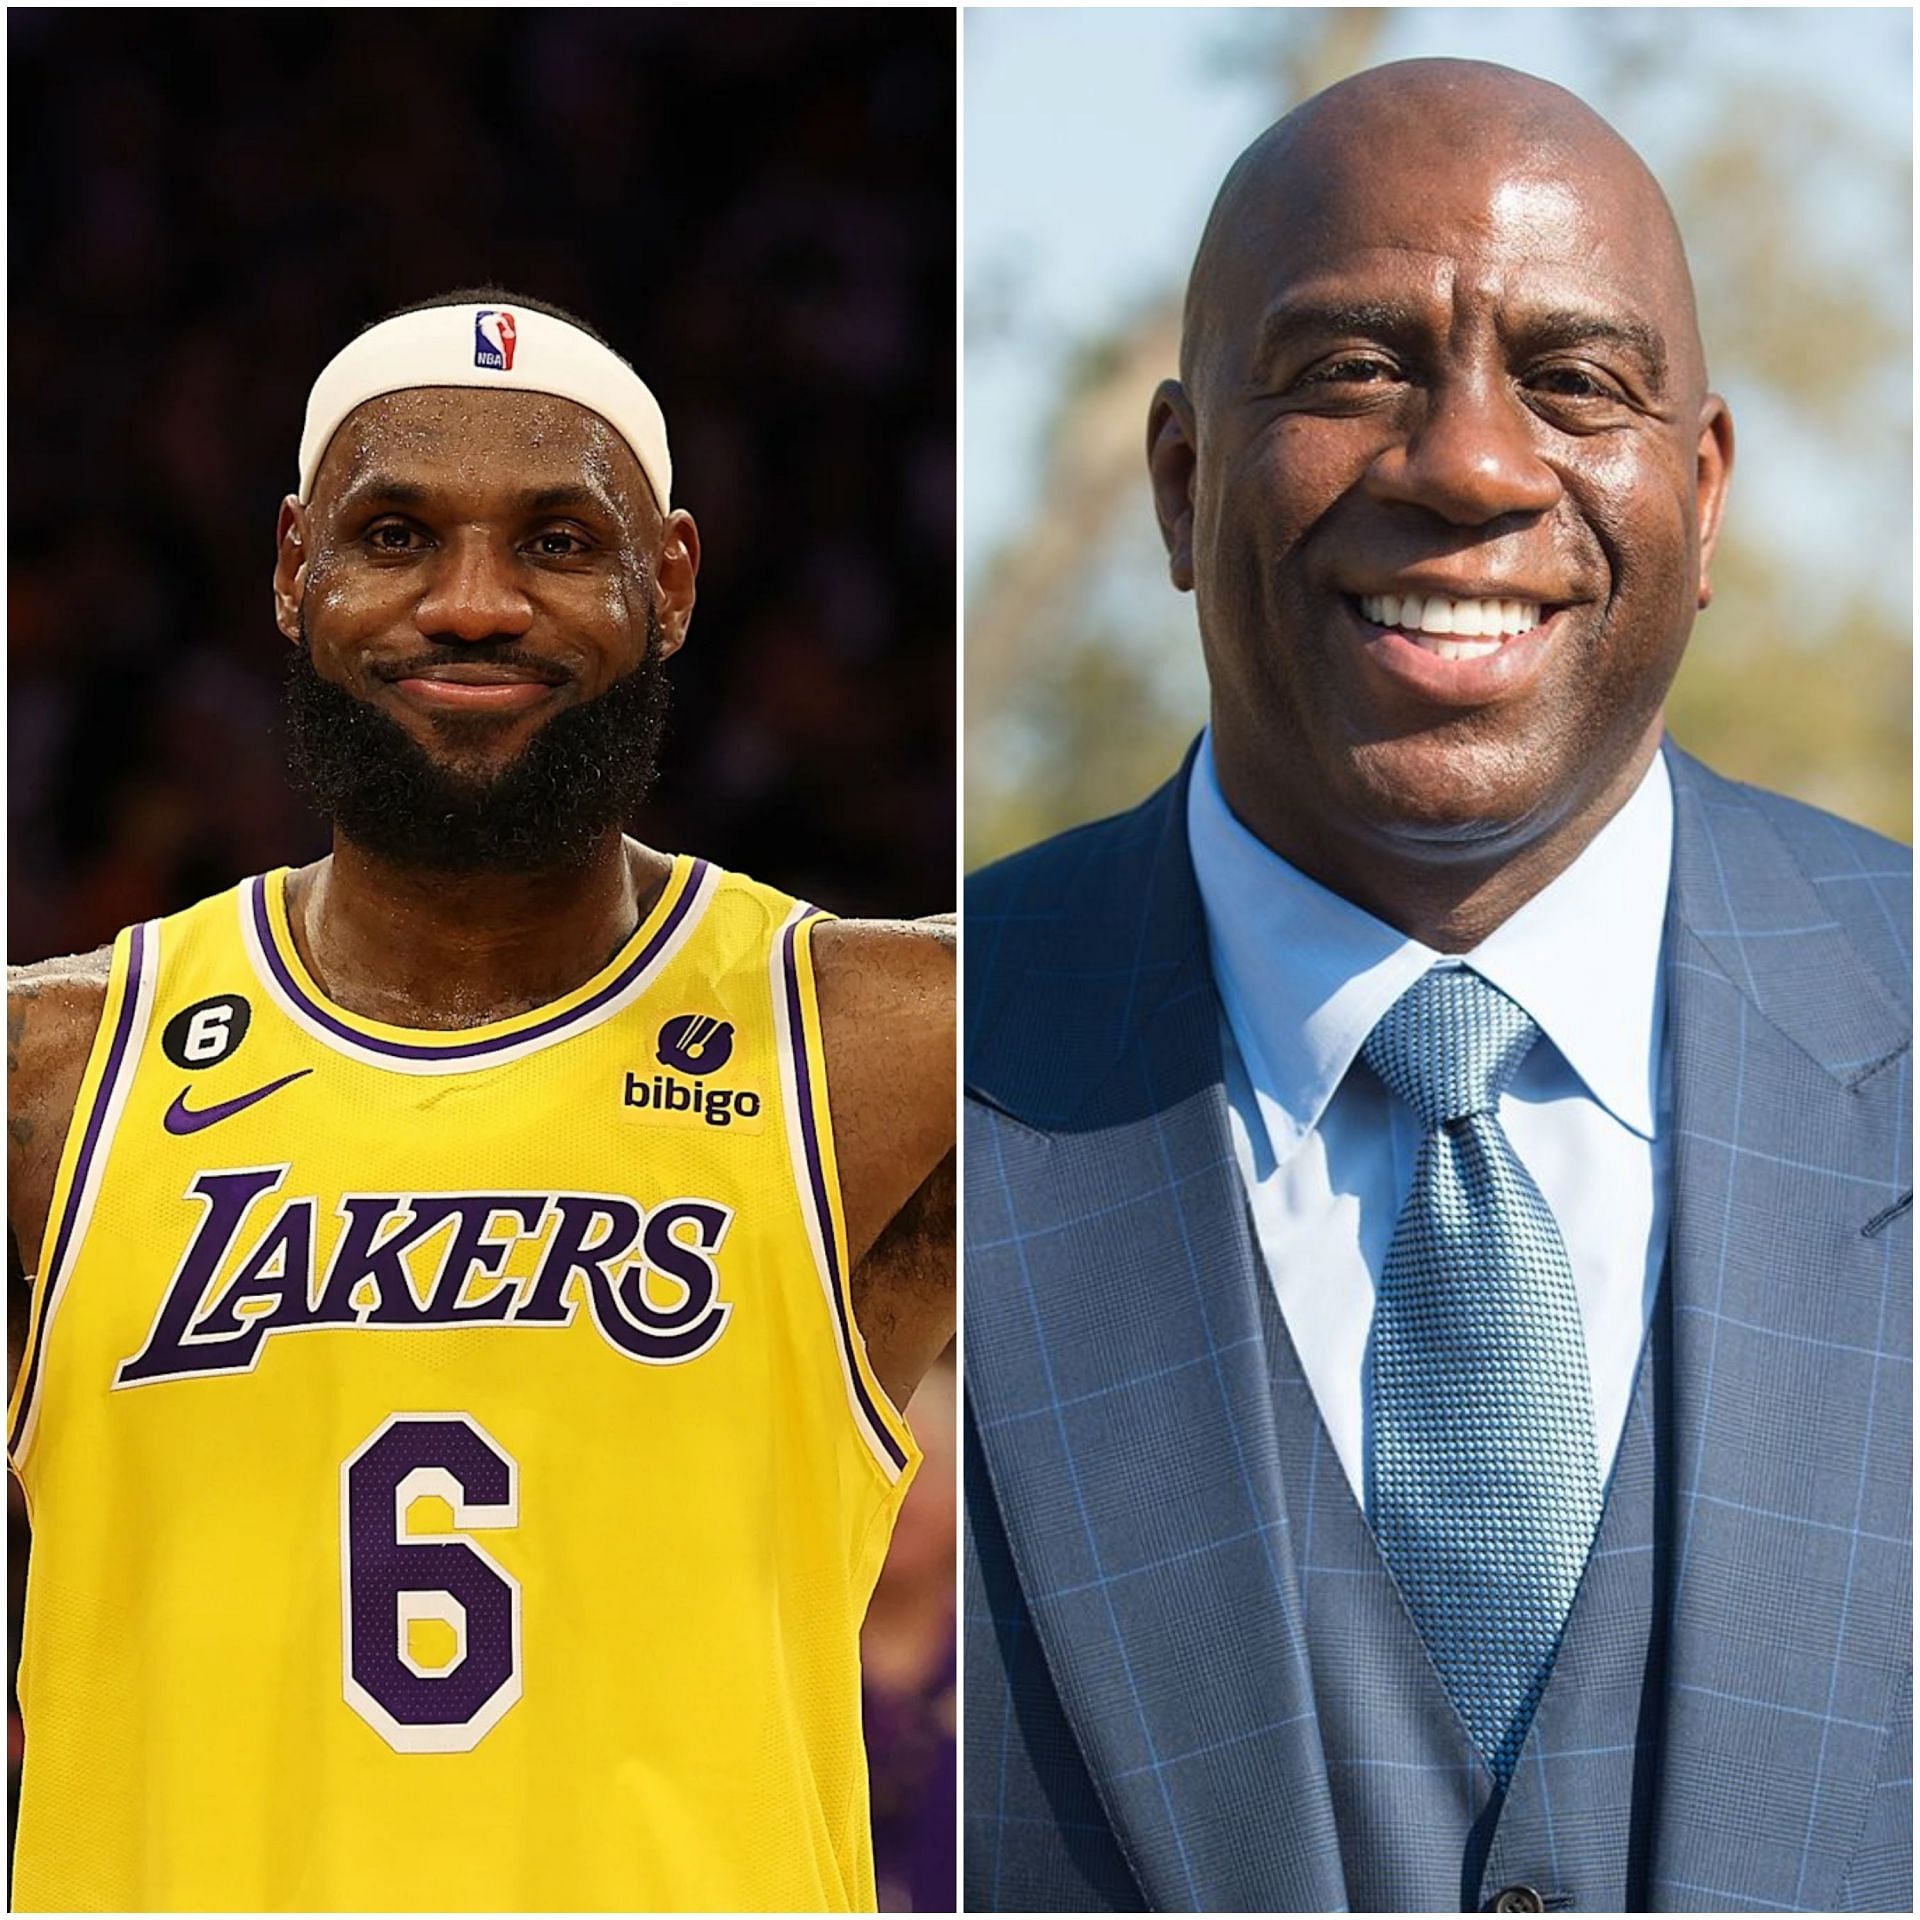 LeBron James and Magic Johnson are both in the top-7 longest shots in NBA History